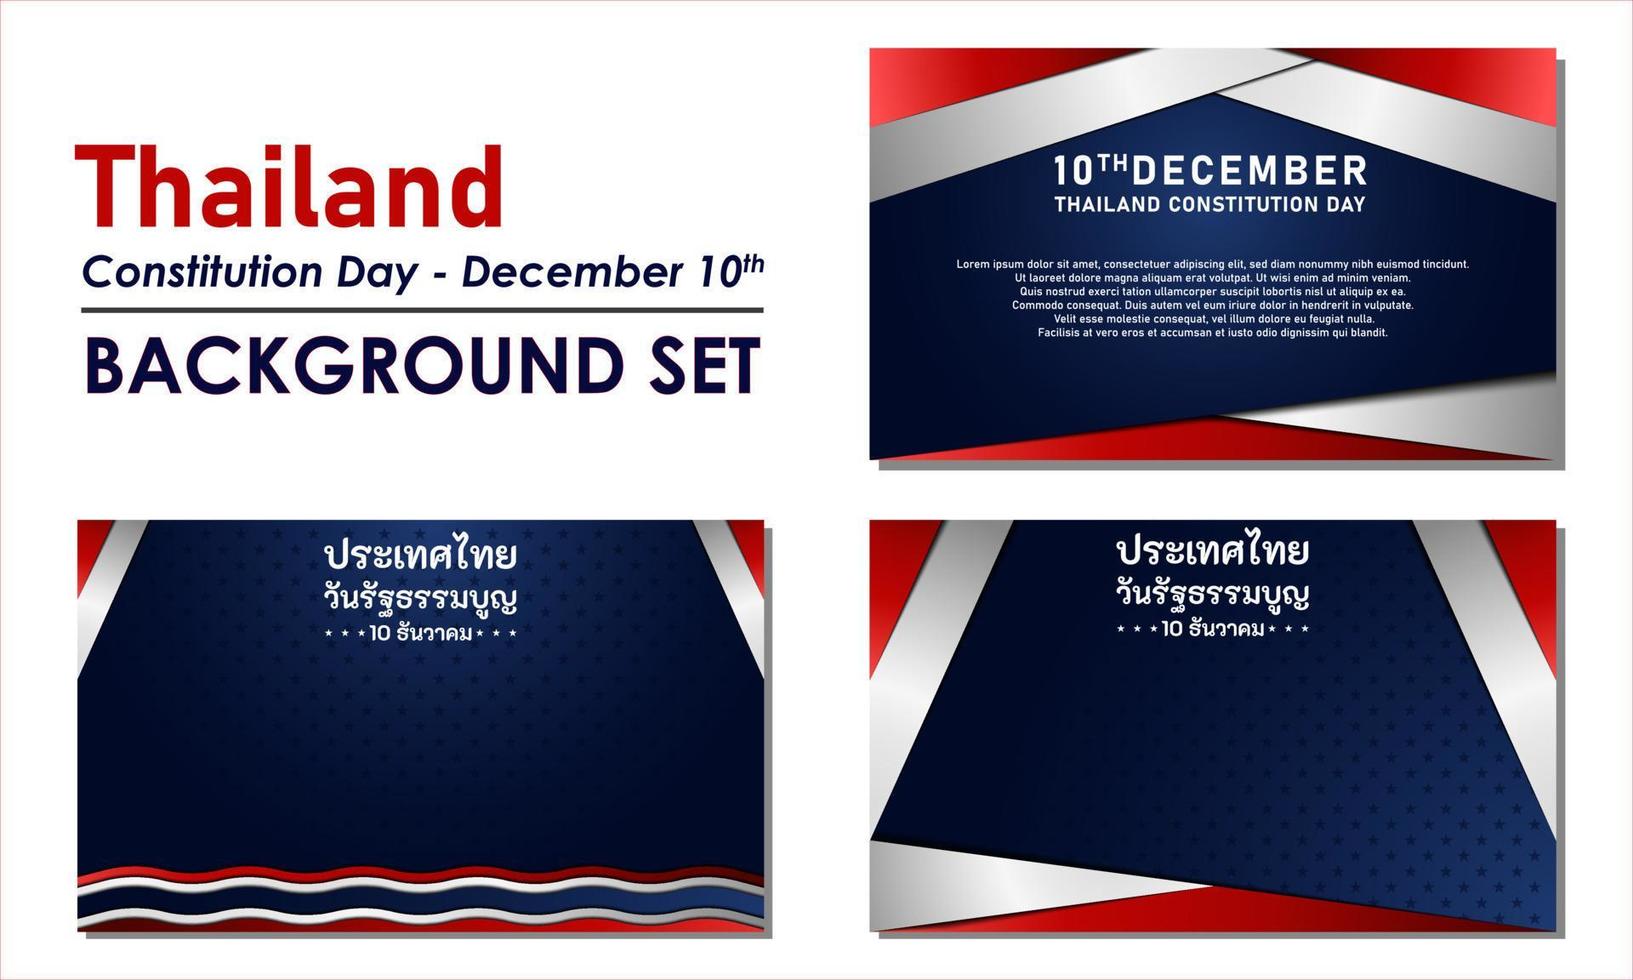 Thailand Constitution Day Background. 10 December. Copy space area. Greeting card, banner, vector illustration. With the Thailand national flag and Thai alphabet text. Premium and luxury design